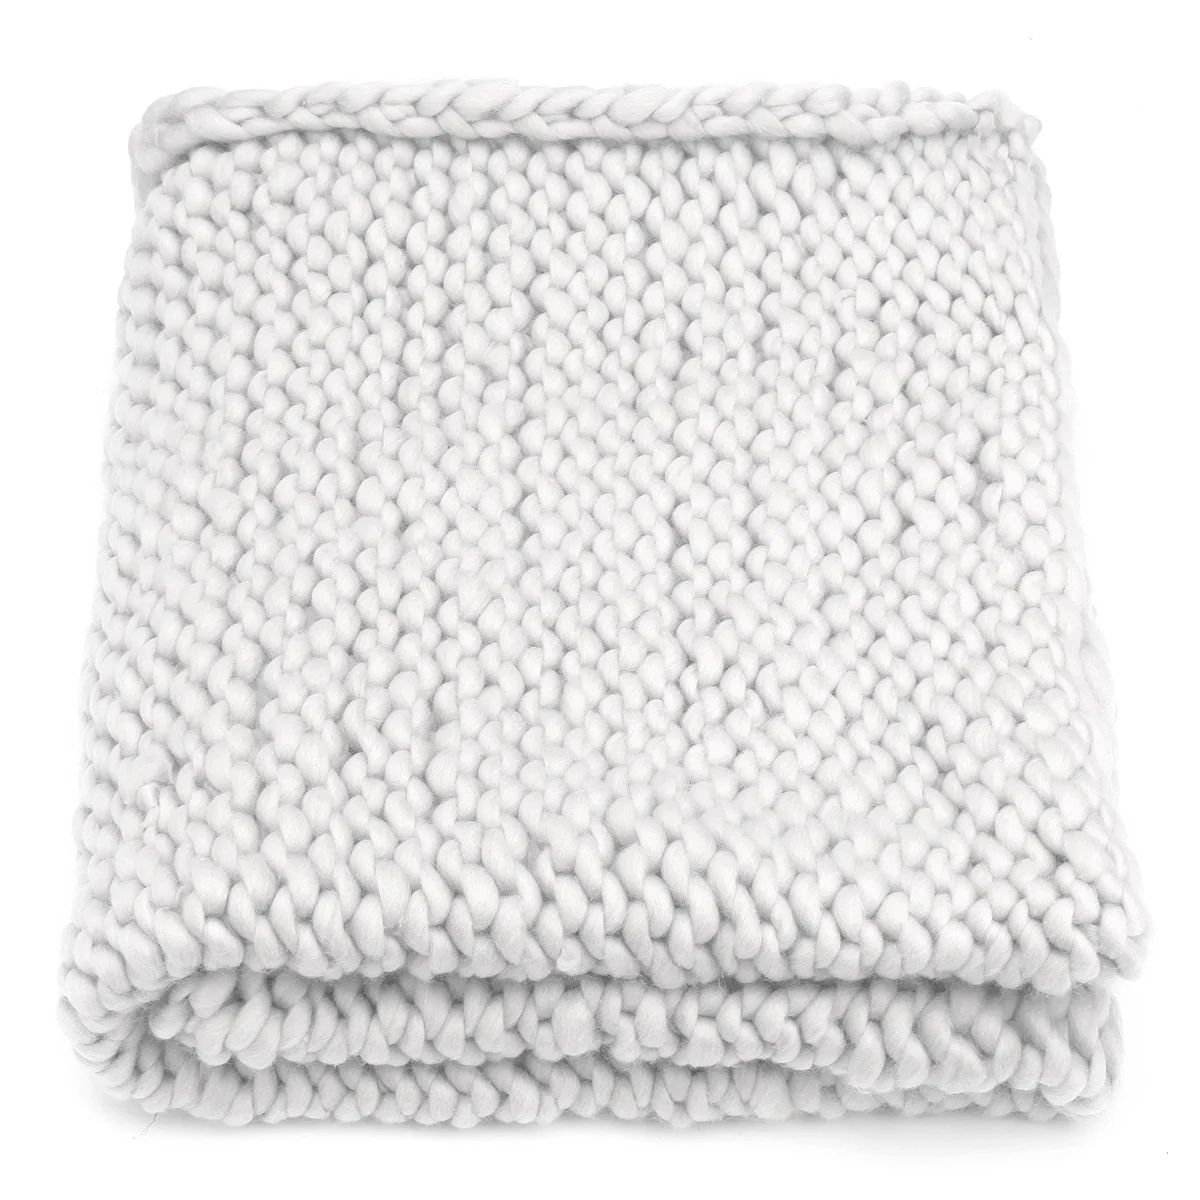 59''x47'' Warm Hand Chunky Knit Blanket Thick Yarn Bulky Bed Spread Throw Soft & Multi Colors | Walmart (US)